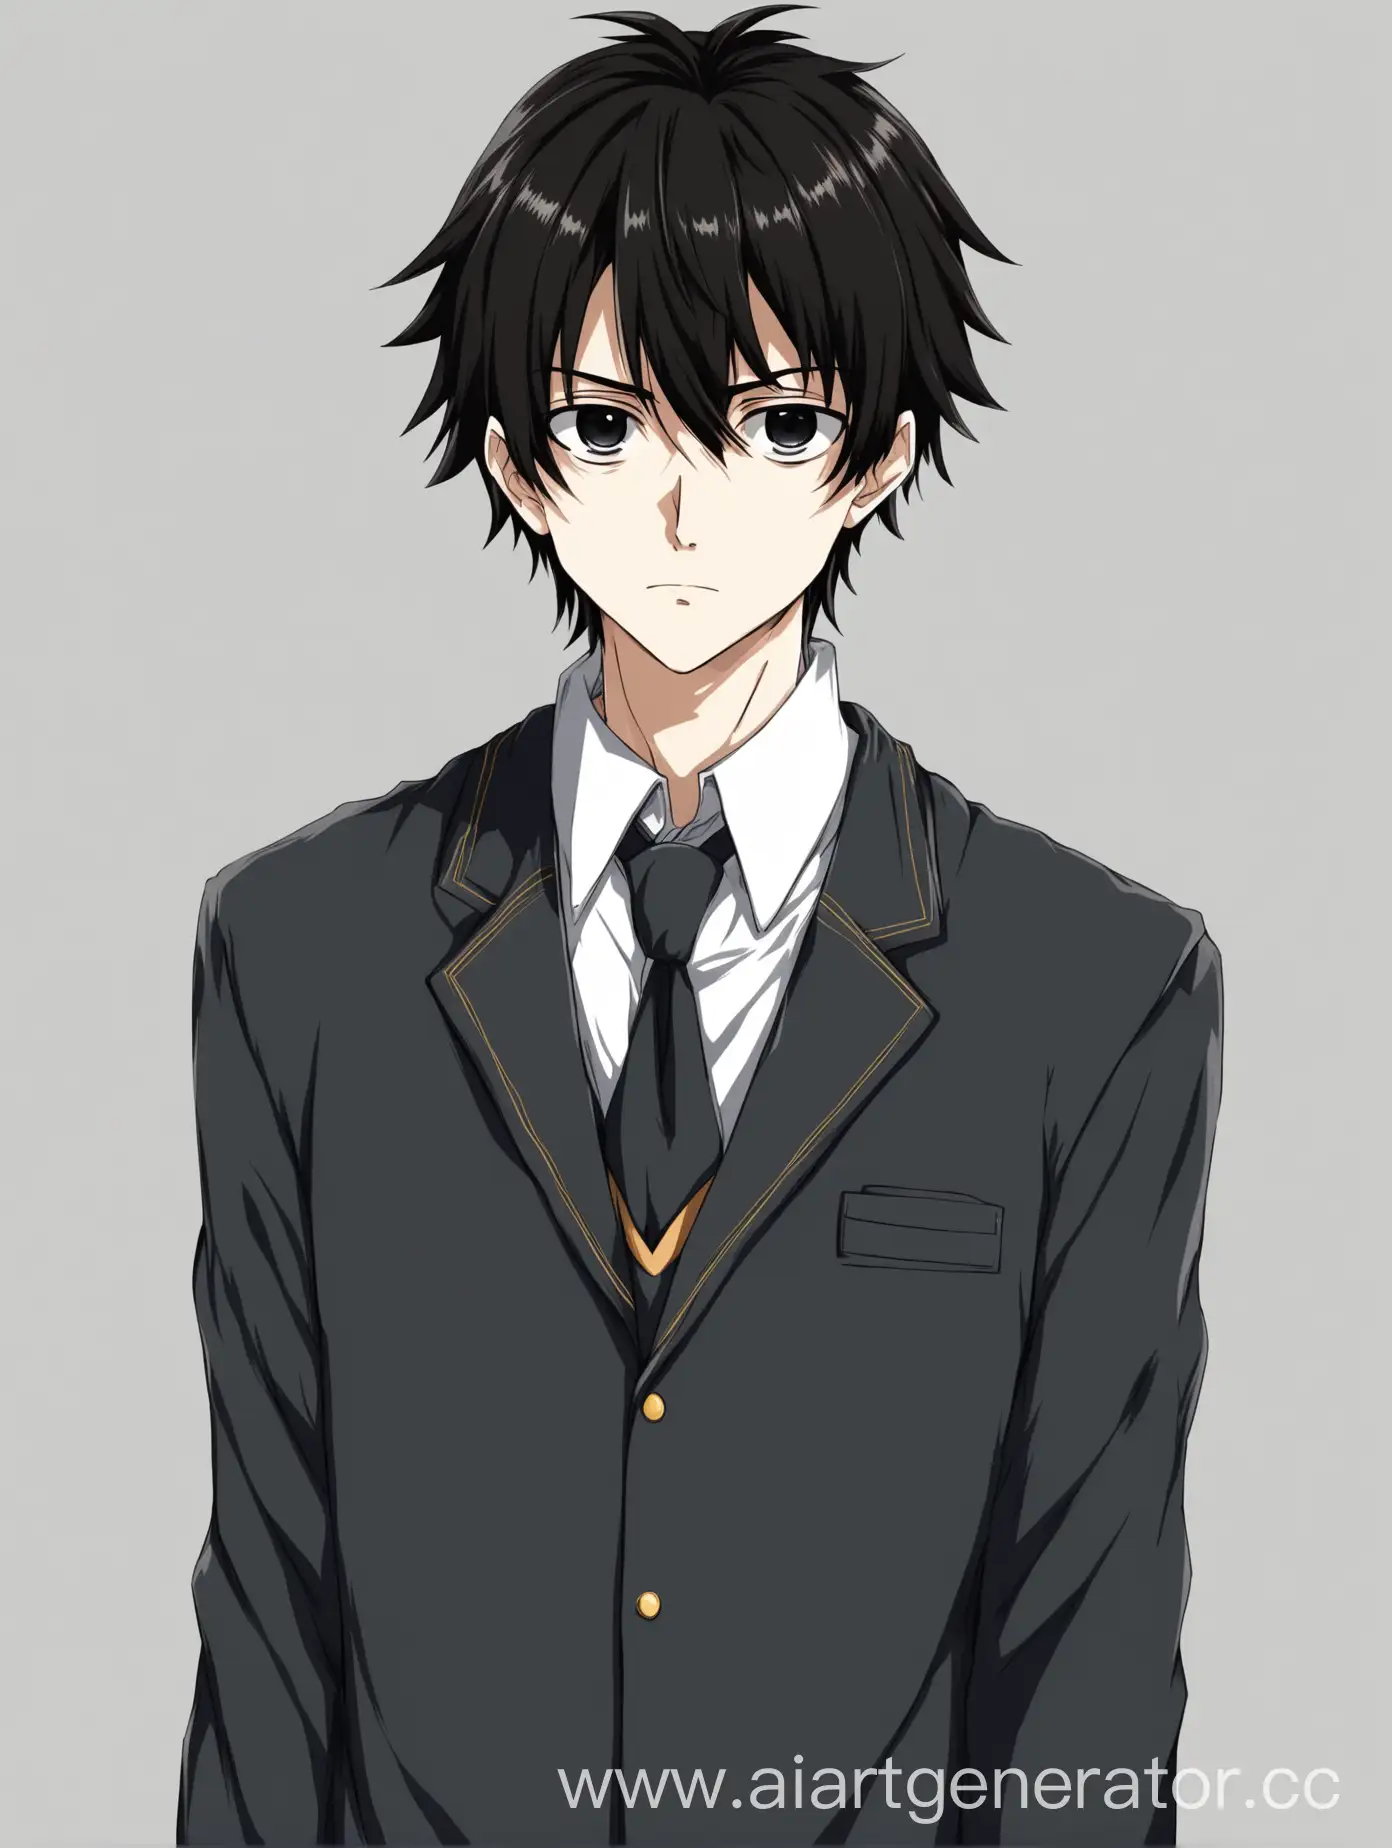 Anime-Schoolboy-with-Black-Eyes-and-Dark-Hair-on-White-Background